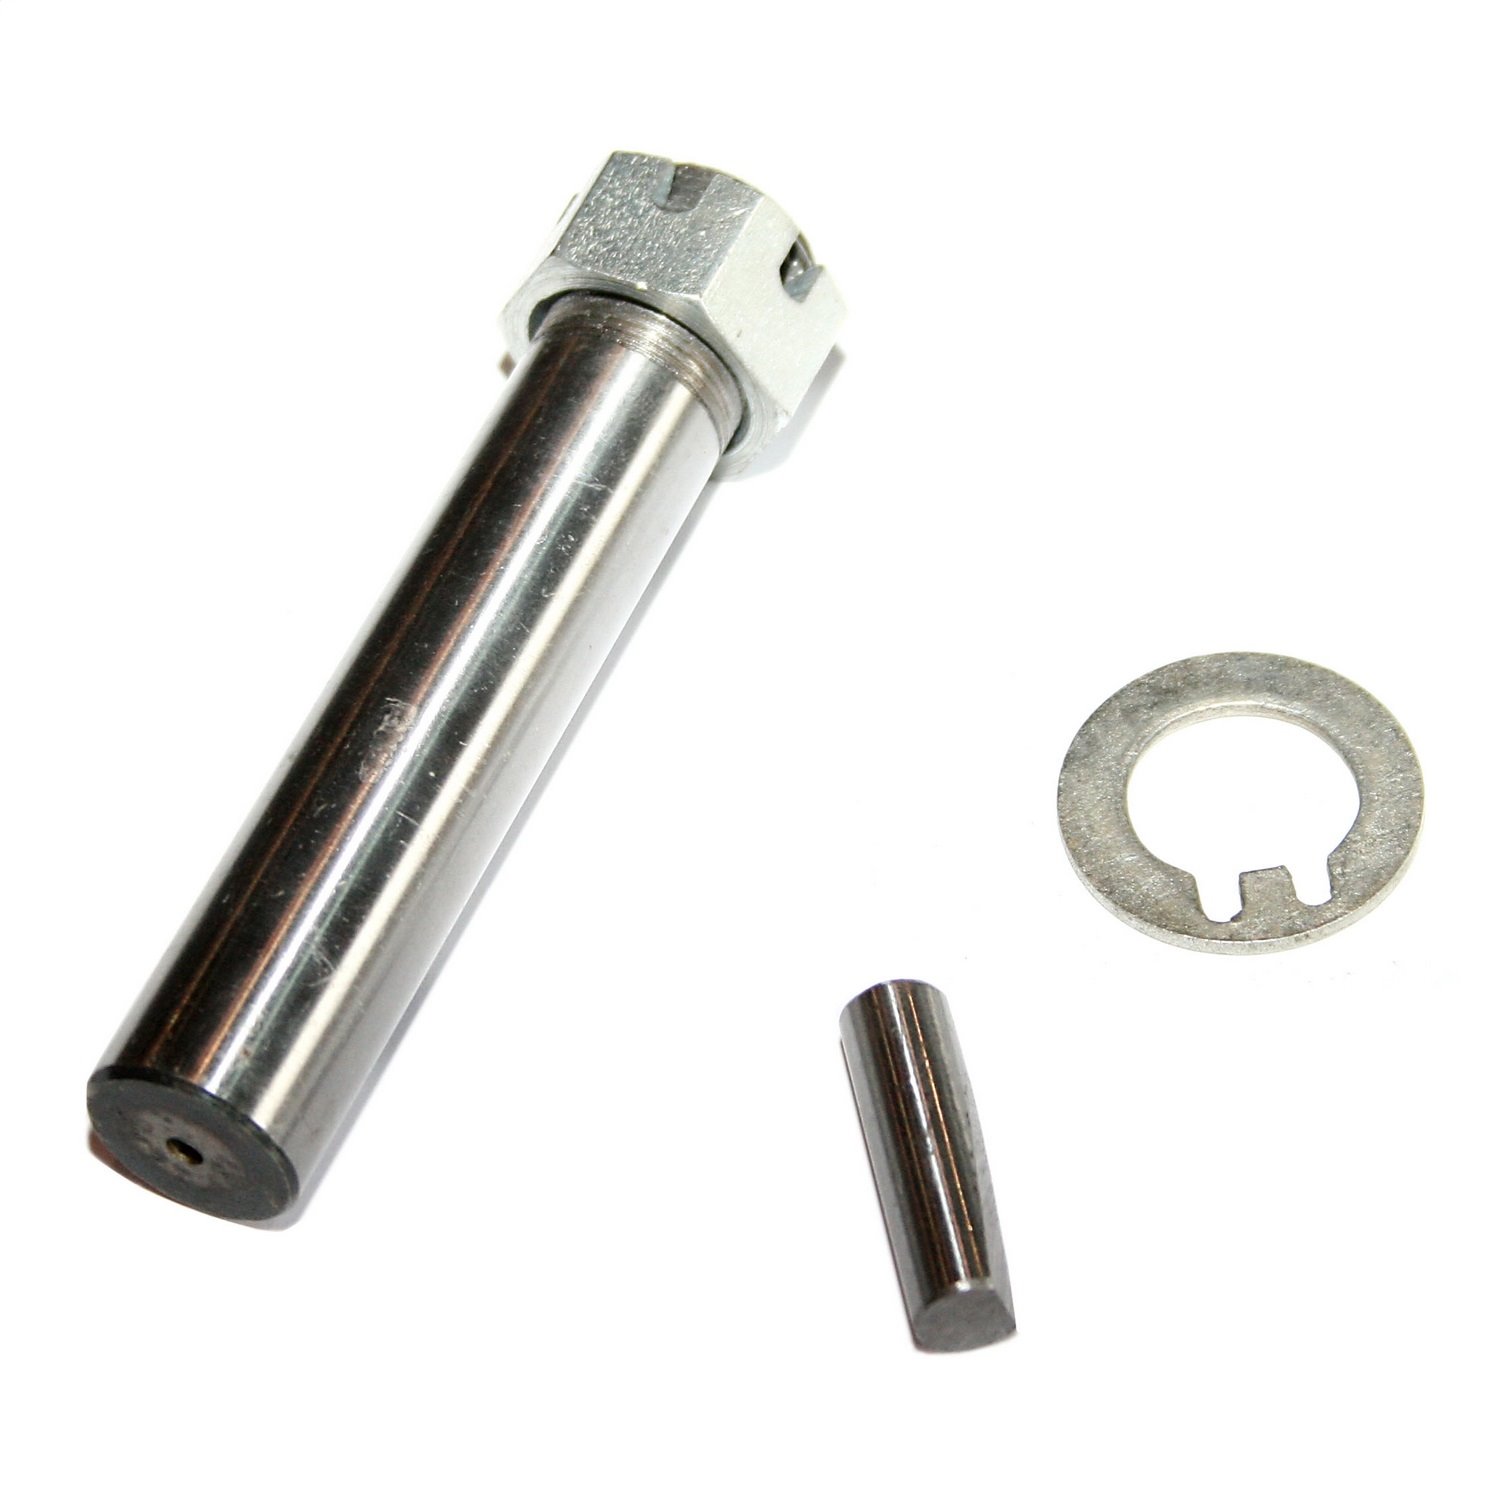 This 3/4 inch steering bellcrank shaft and nut from Omix-ADA fits 41-45 Ford GPWs 41-45 Willys MBs a